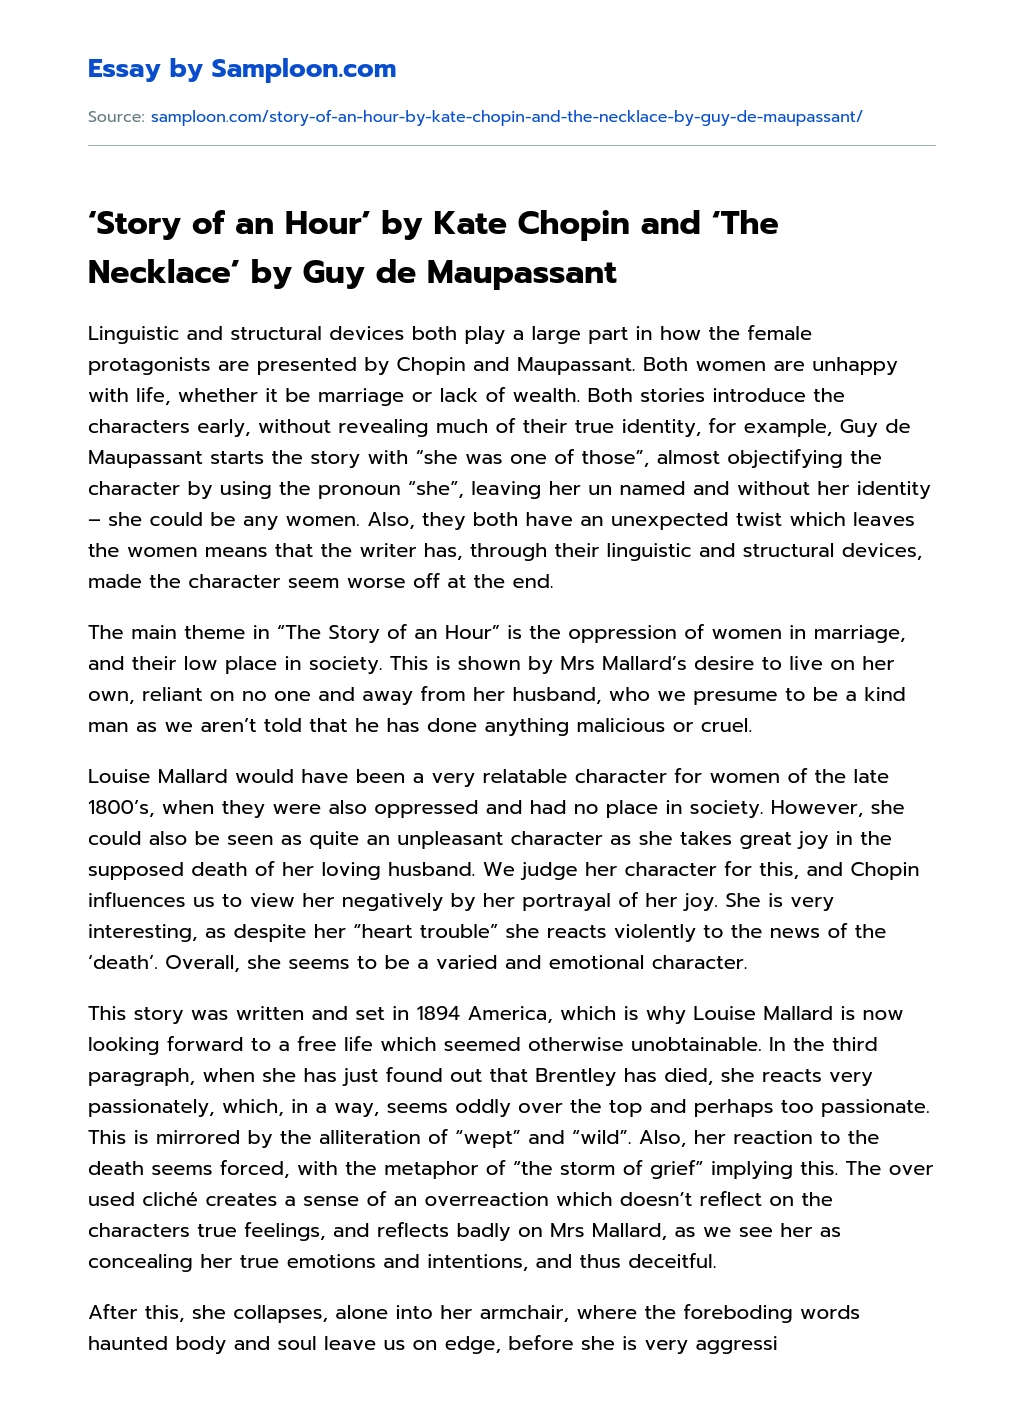 Story of an Hour’ by Kate Chopin and ‘The Necklace’ by Guy de Maupassant Character Analysis essay